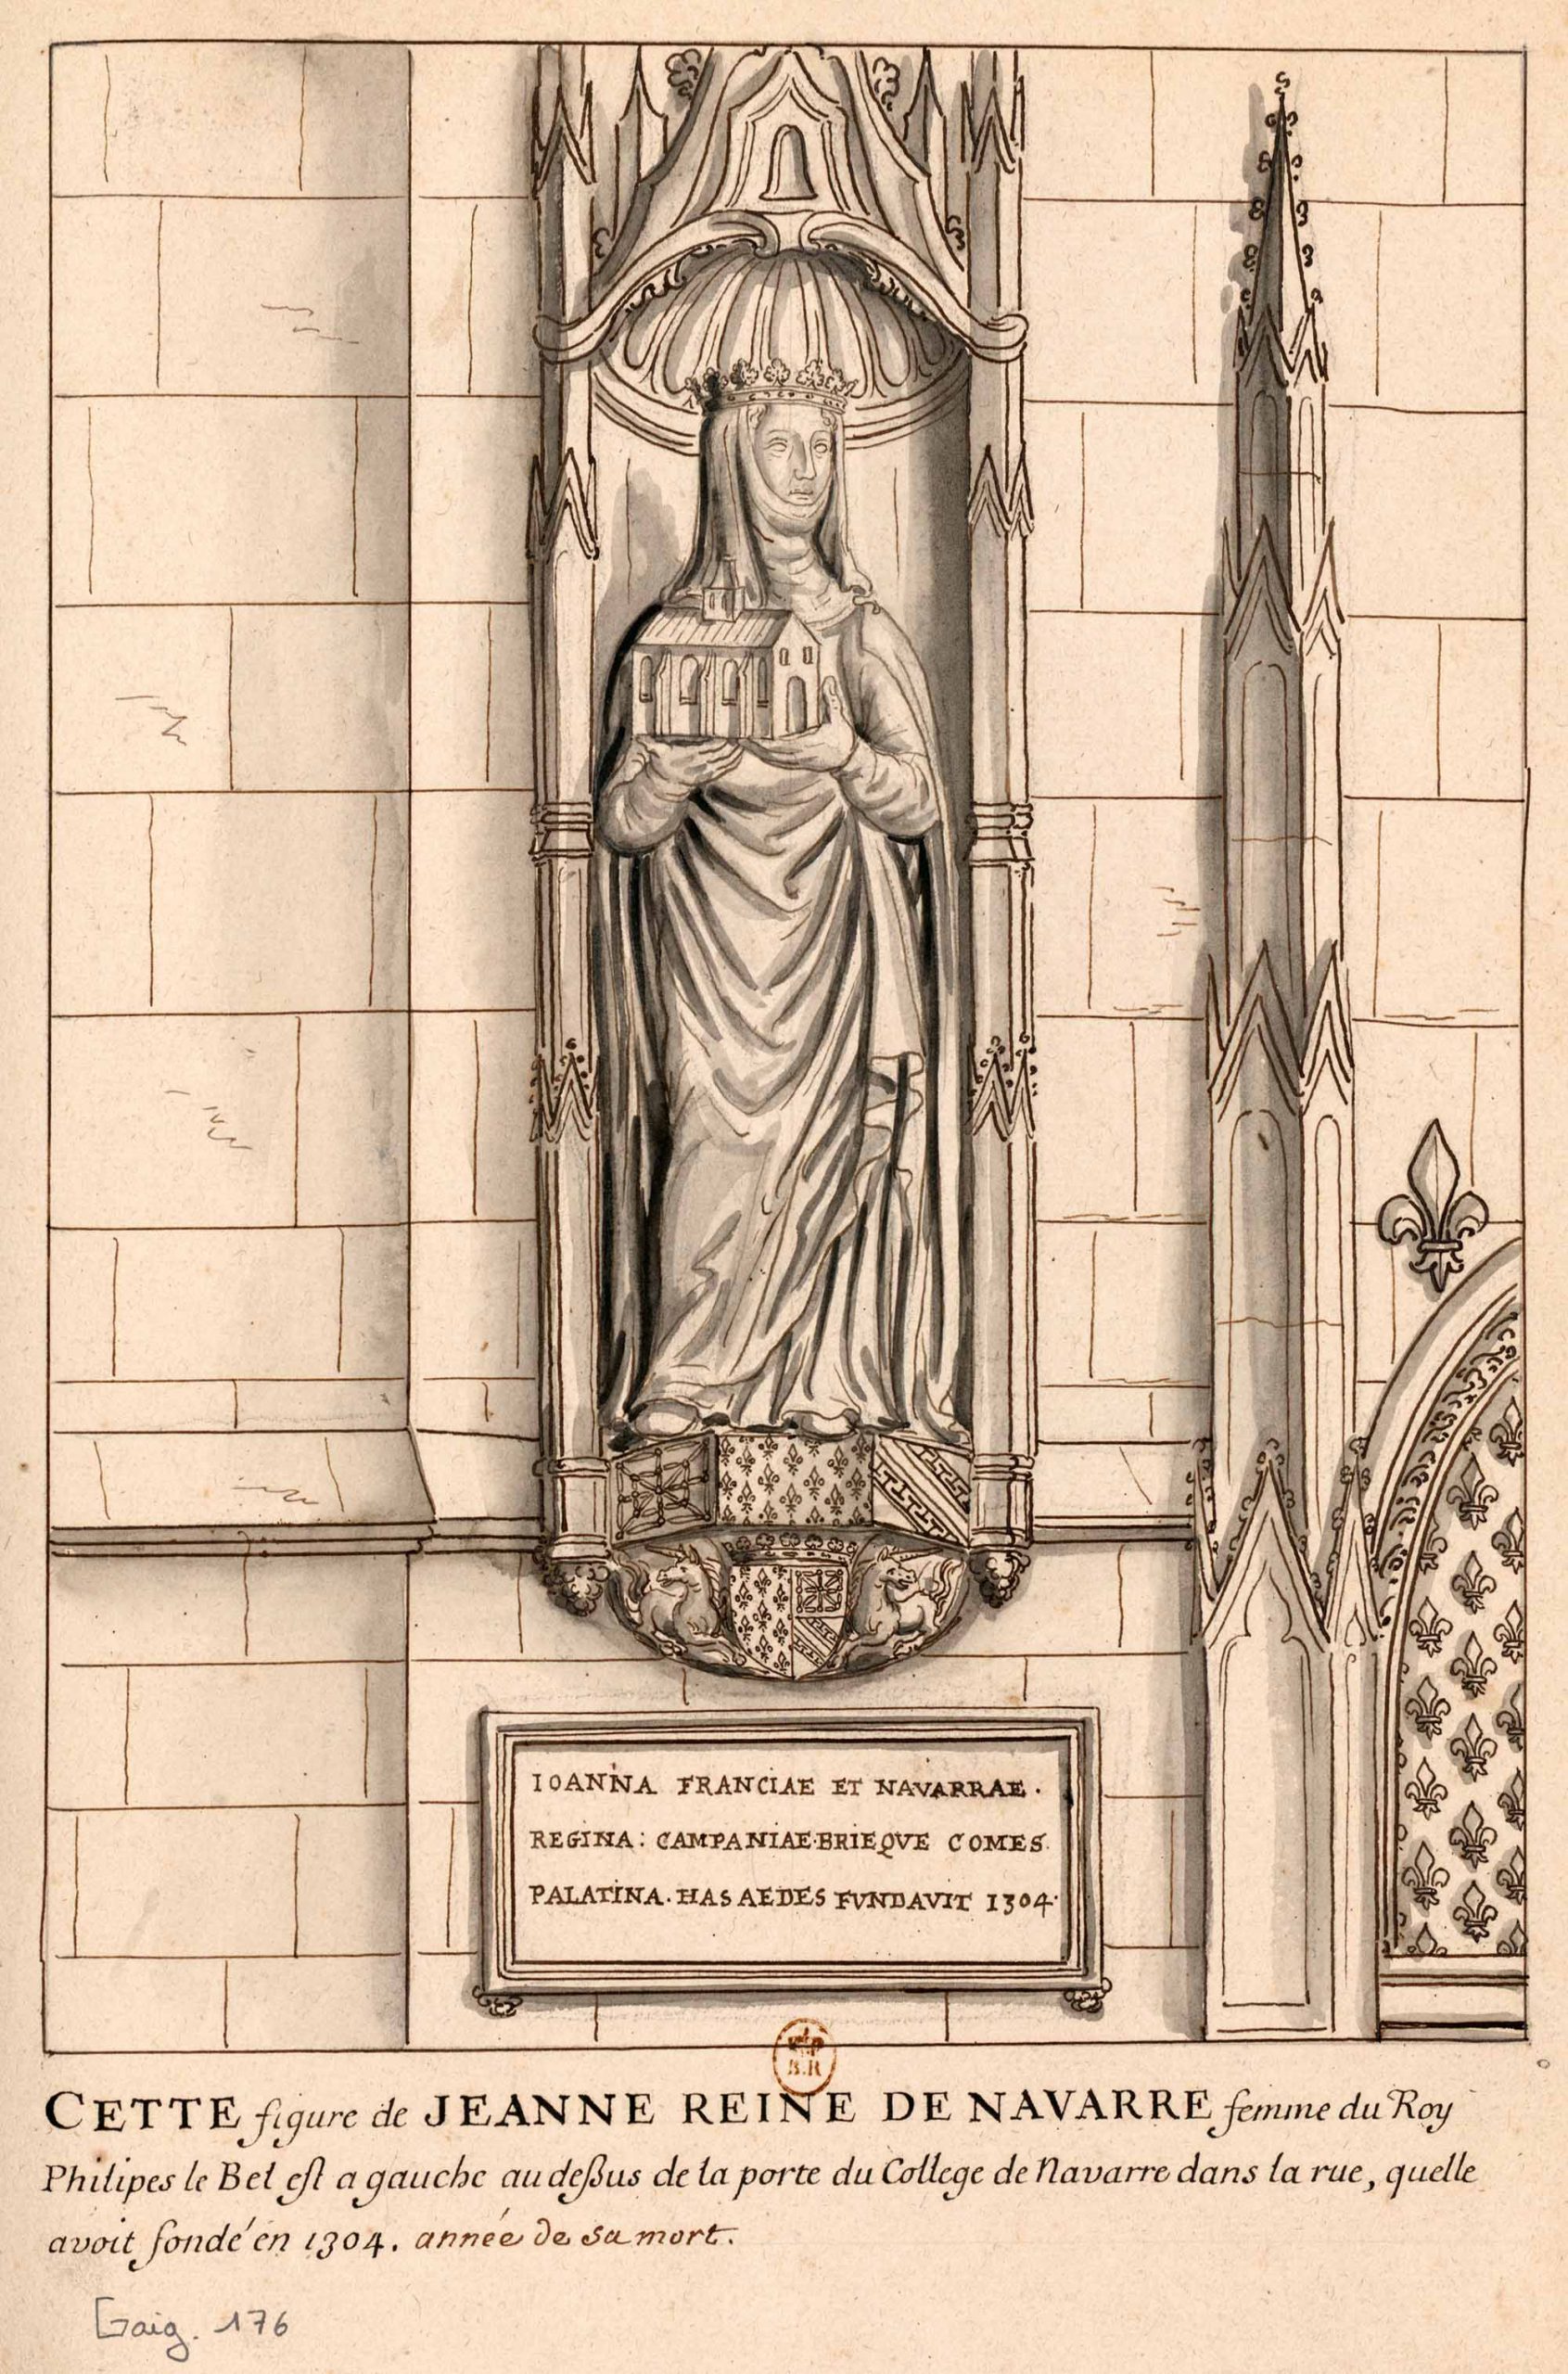 Roger de Gaignières, drawing of Jeanne of Navarre and Champagne from the Collège de Navarre